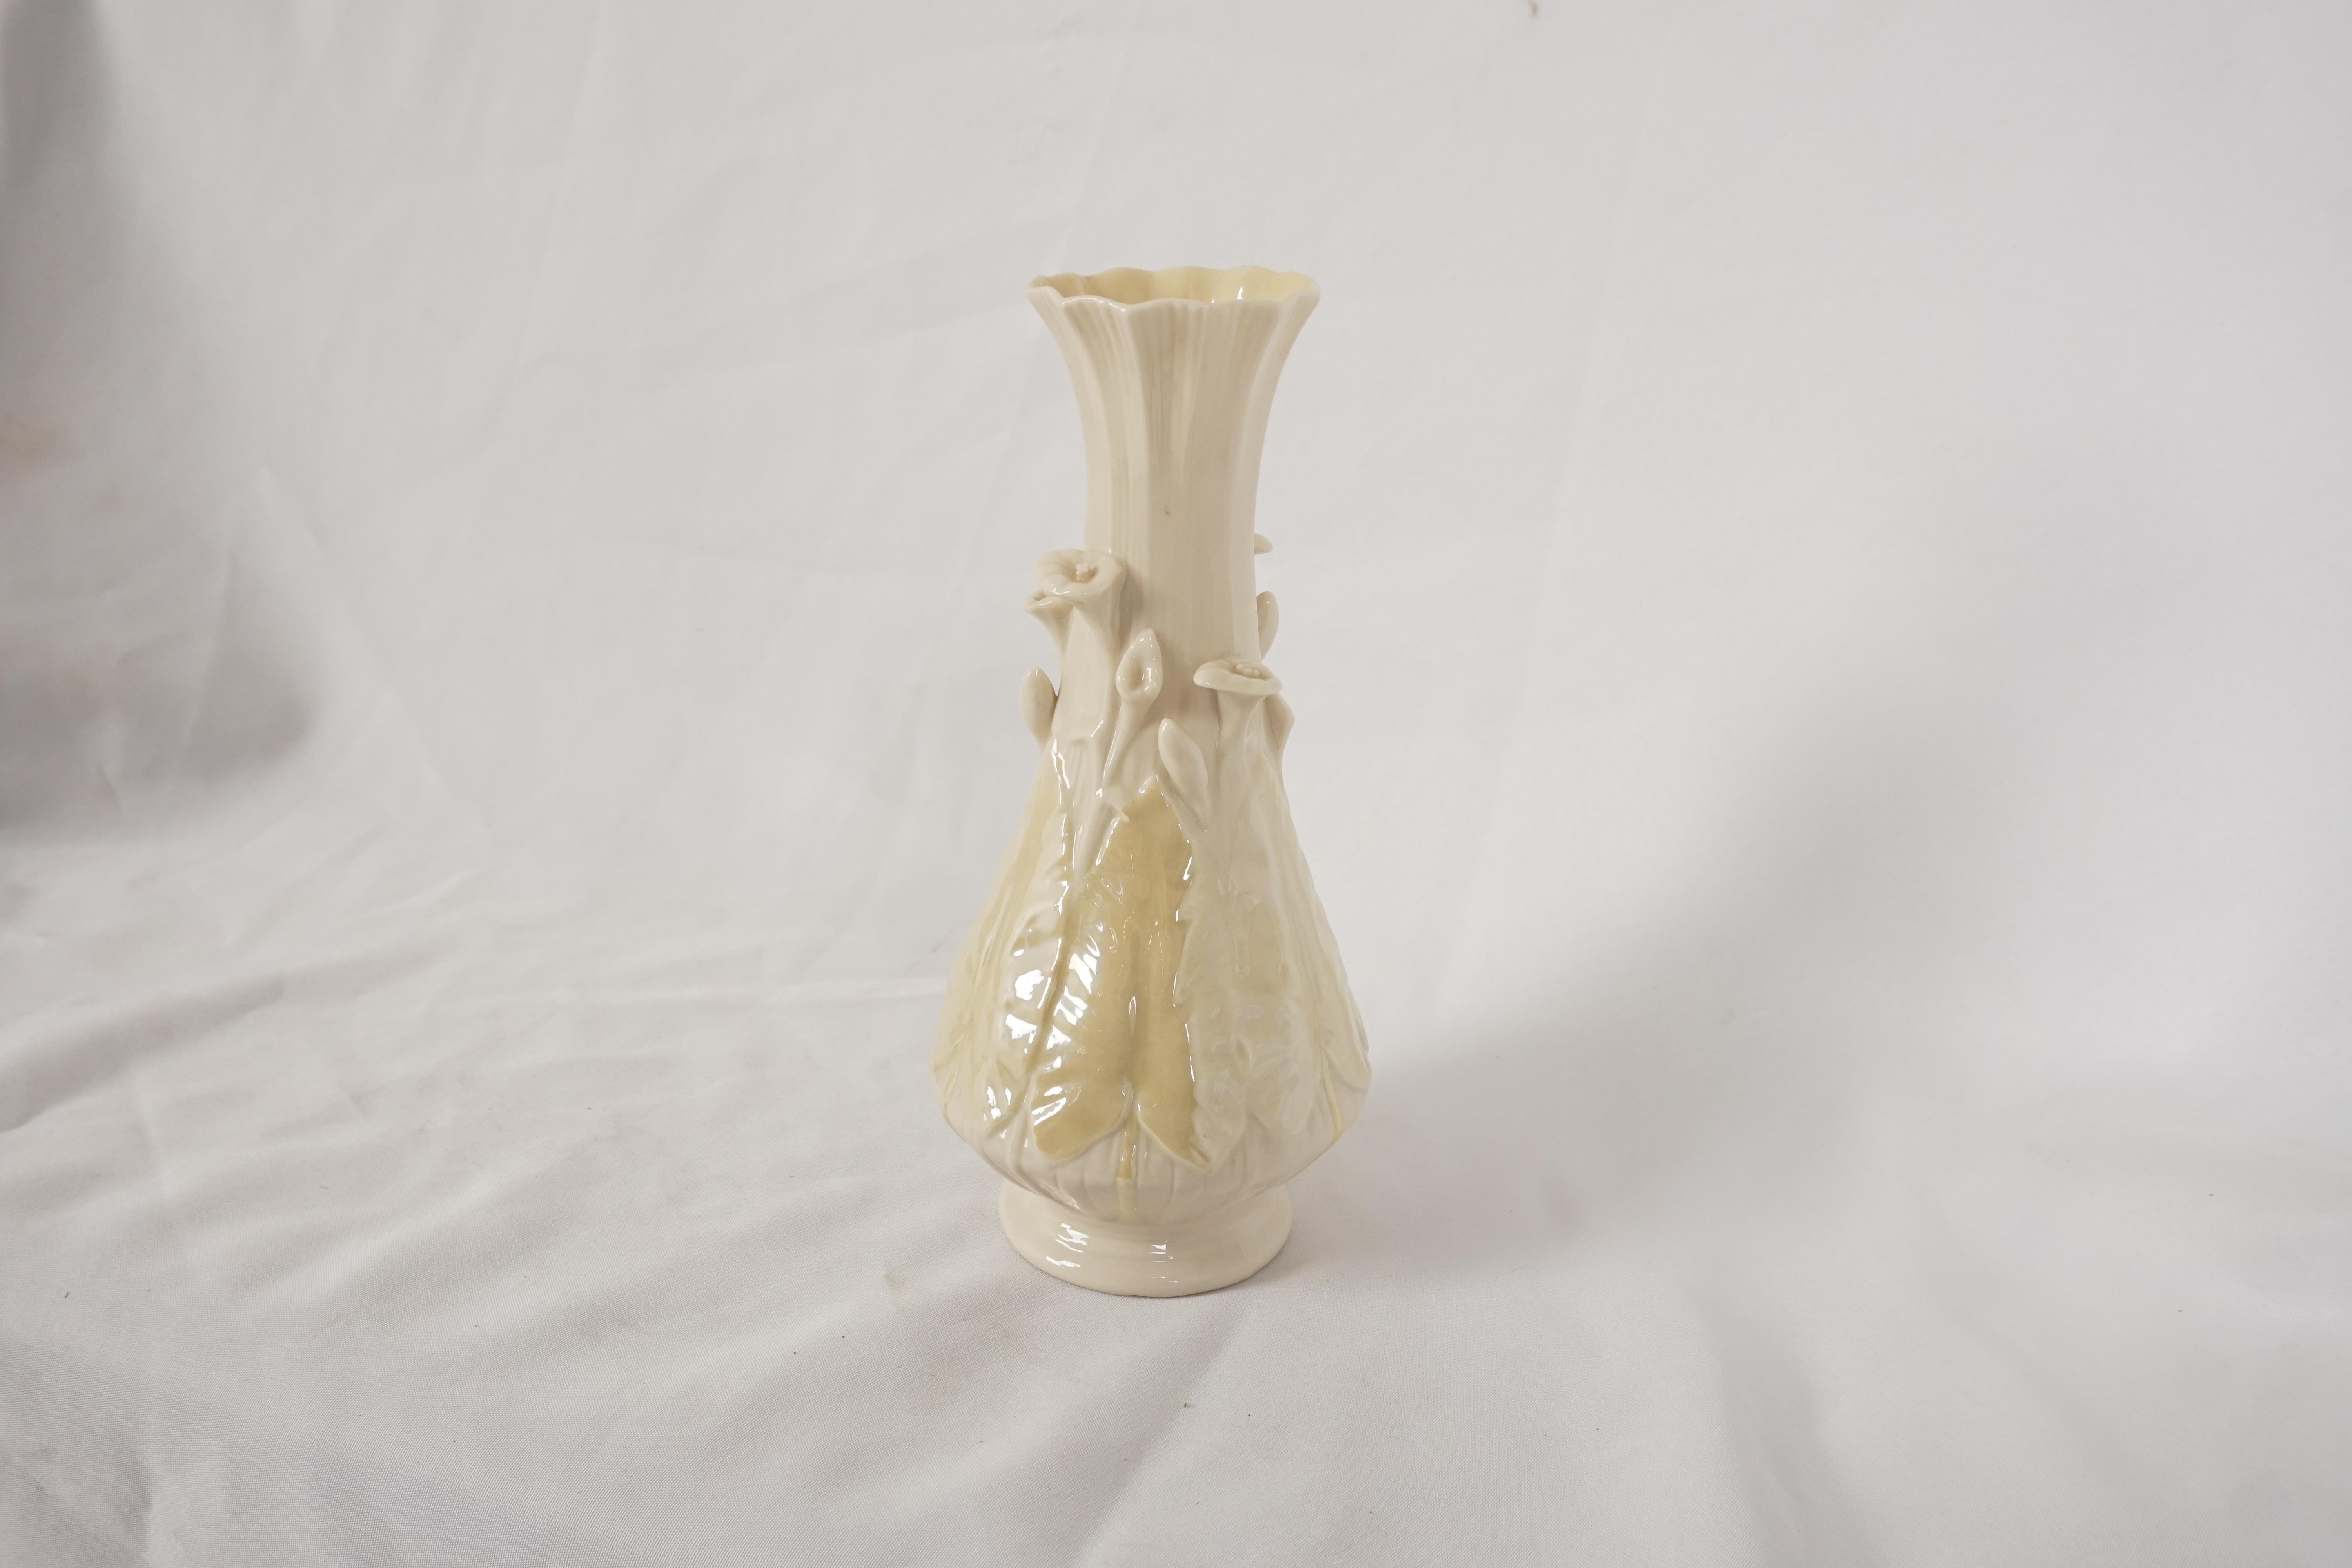 Vintage Belleek vase, 3D lily leaf, ivory green 6th Mark Giftware, Ireland 1950, B16

Ireland 1950
Model 6th Mark Giftware
Ceramic
In very good condition
No cracks or chips

B16

Measures: 5